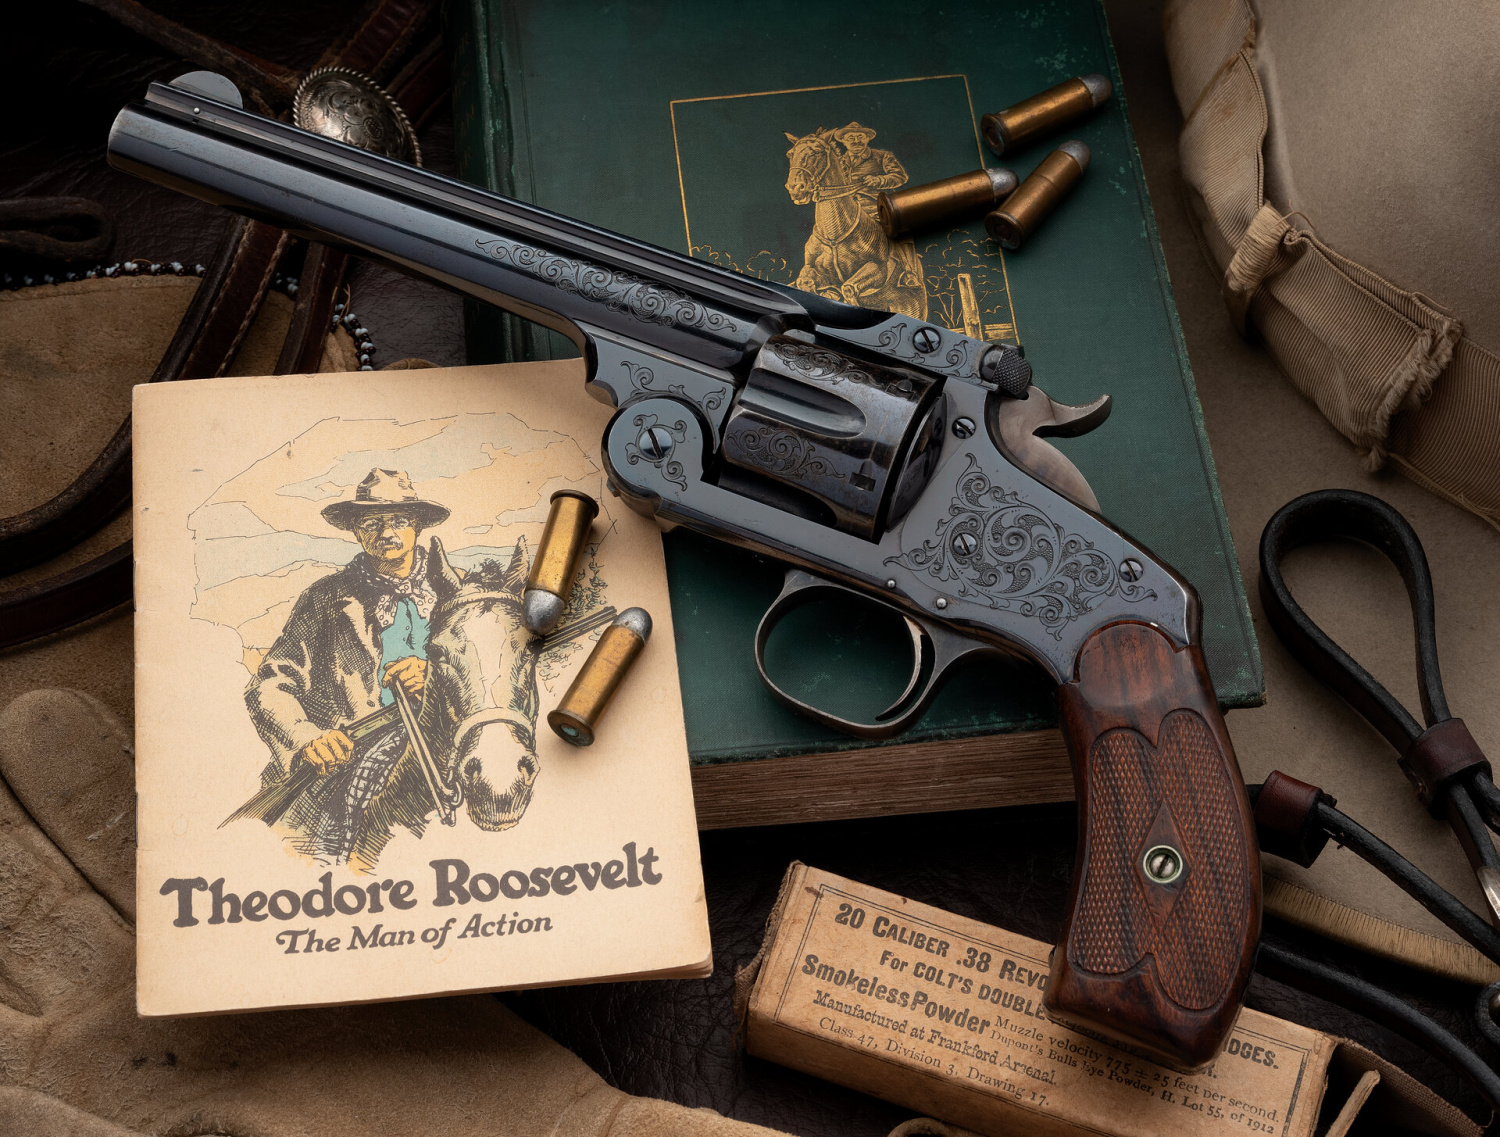 It is unknown whether the new owner of this famous revolver will display it or use it as a nightstand gun, as Roosevelt did in the White House.